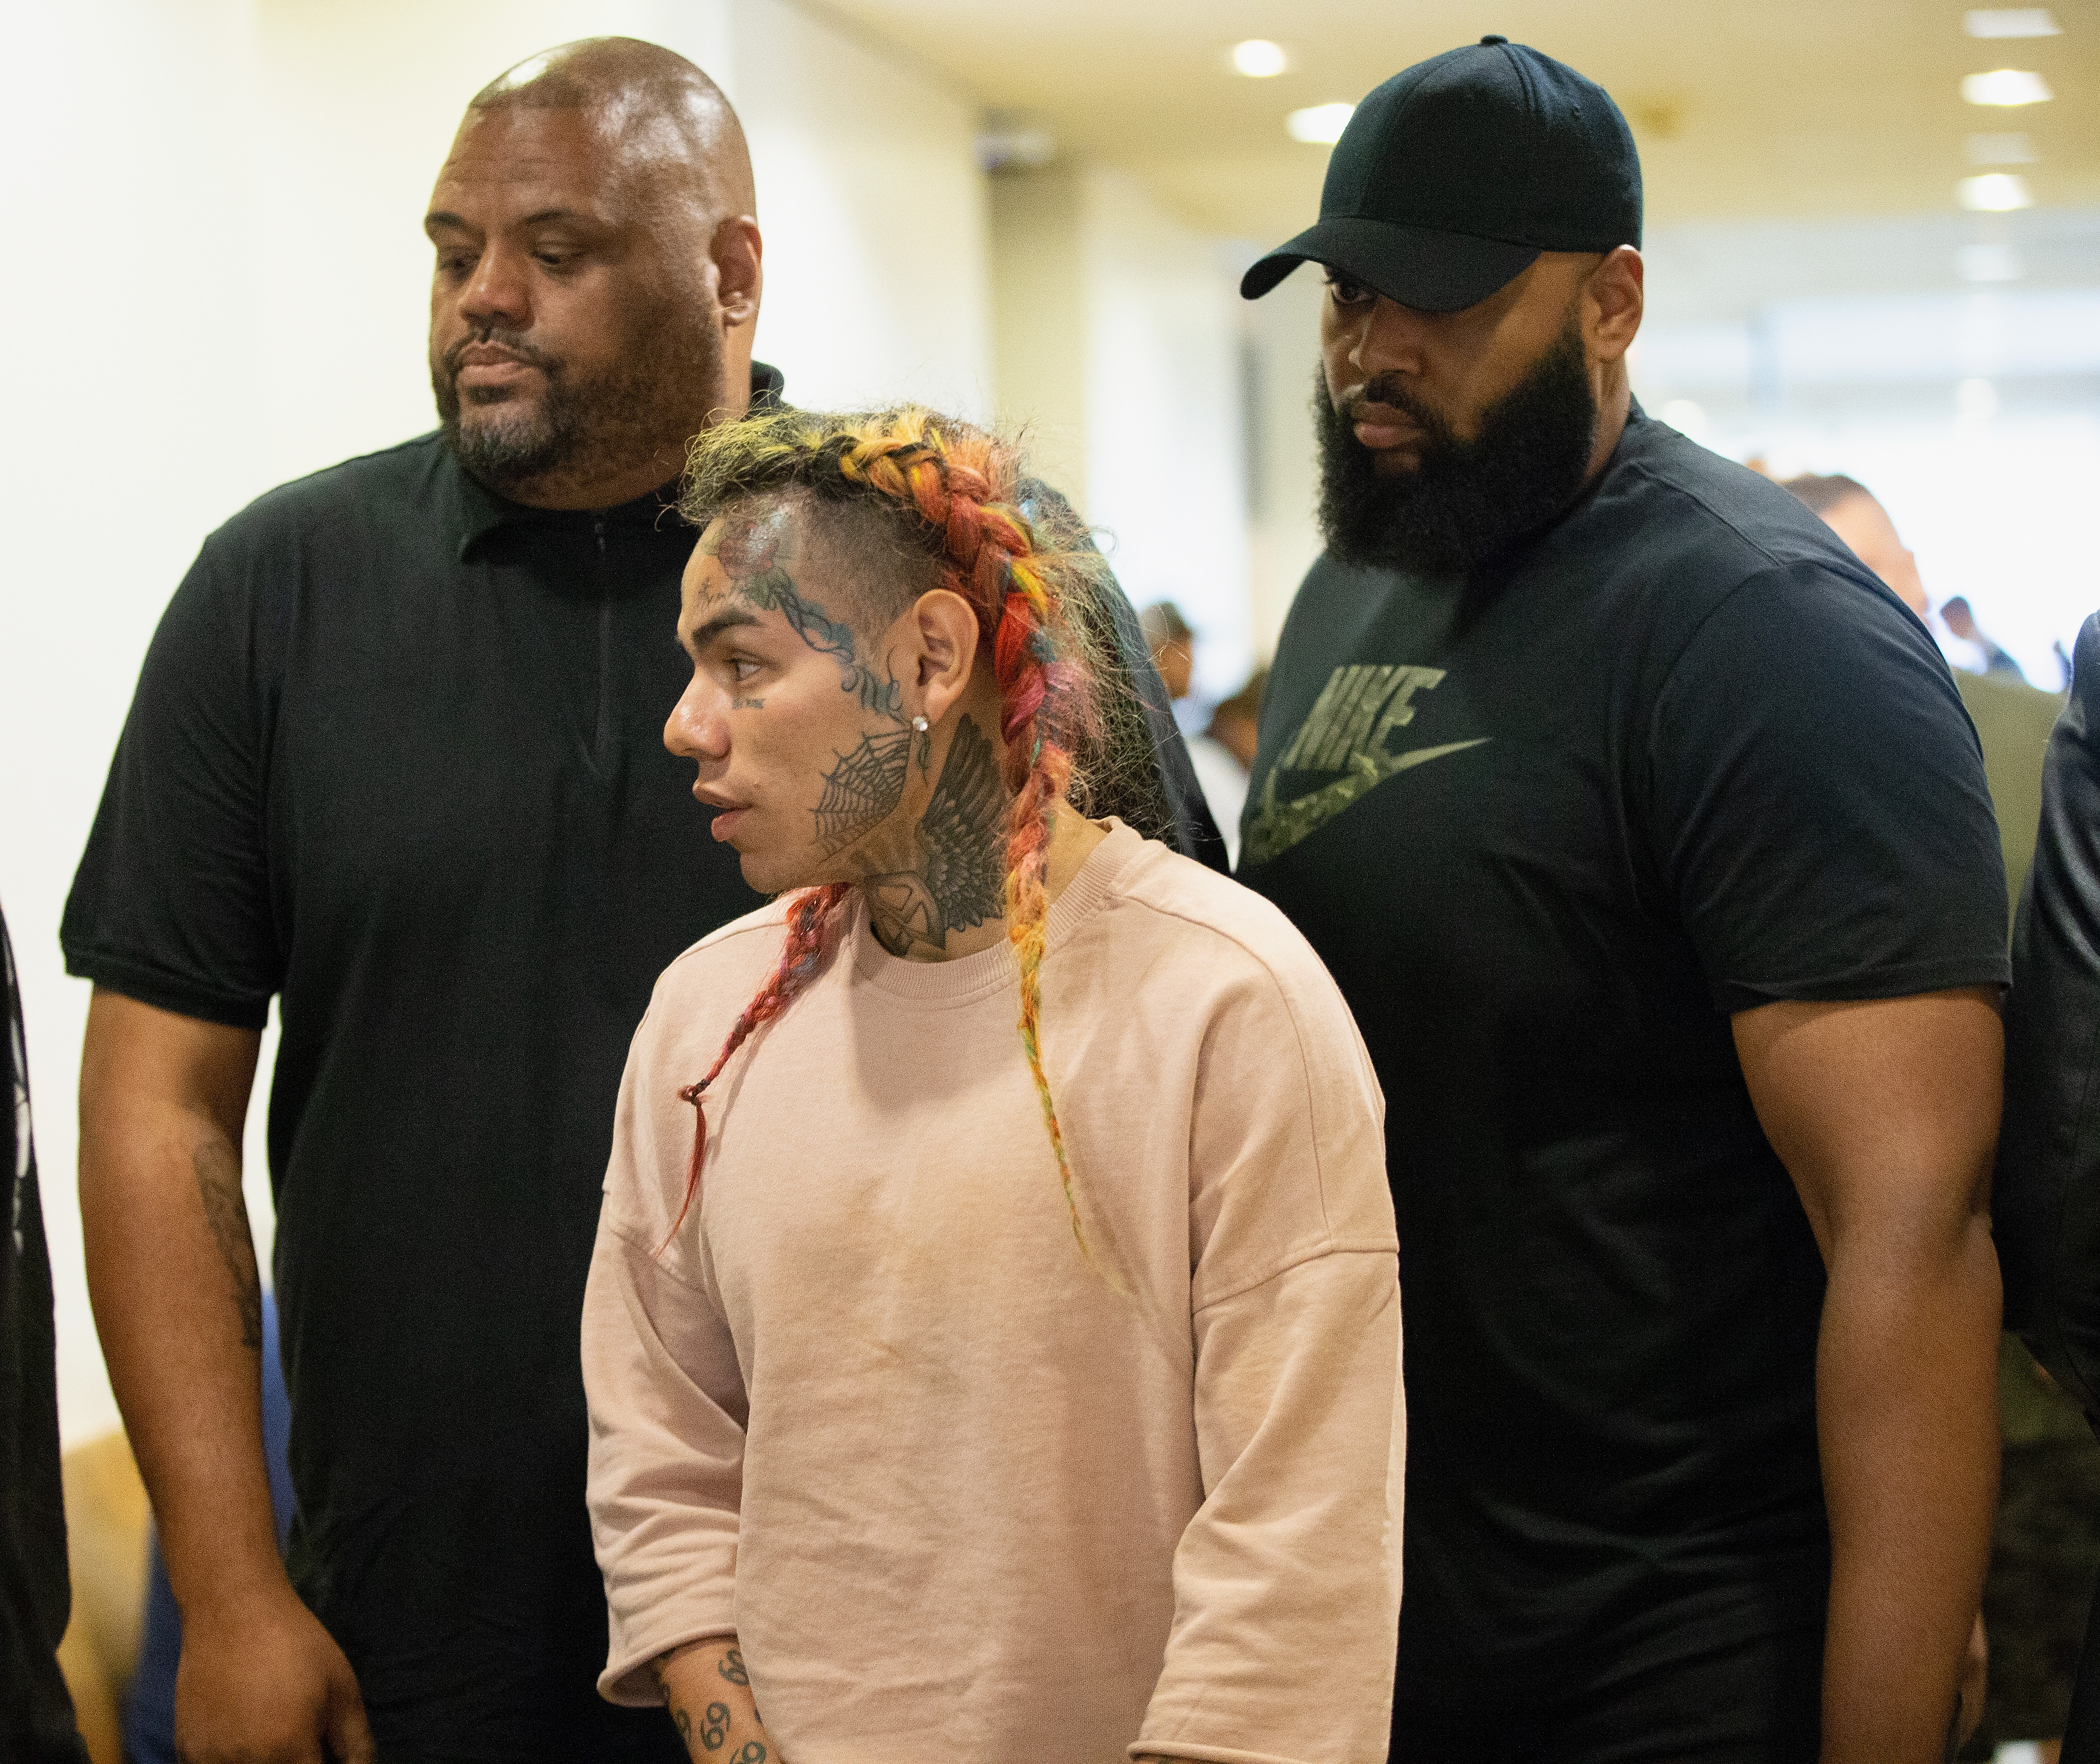 6ix9ine’s Ex-Manager Shotti Hires A New Lawyer